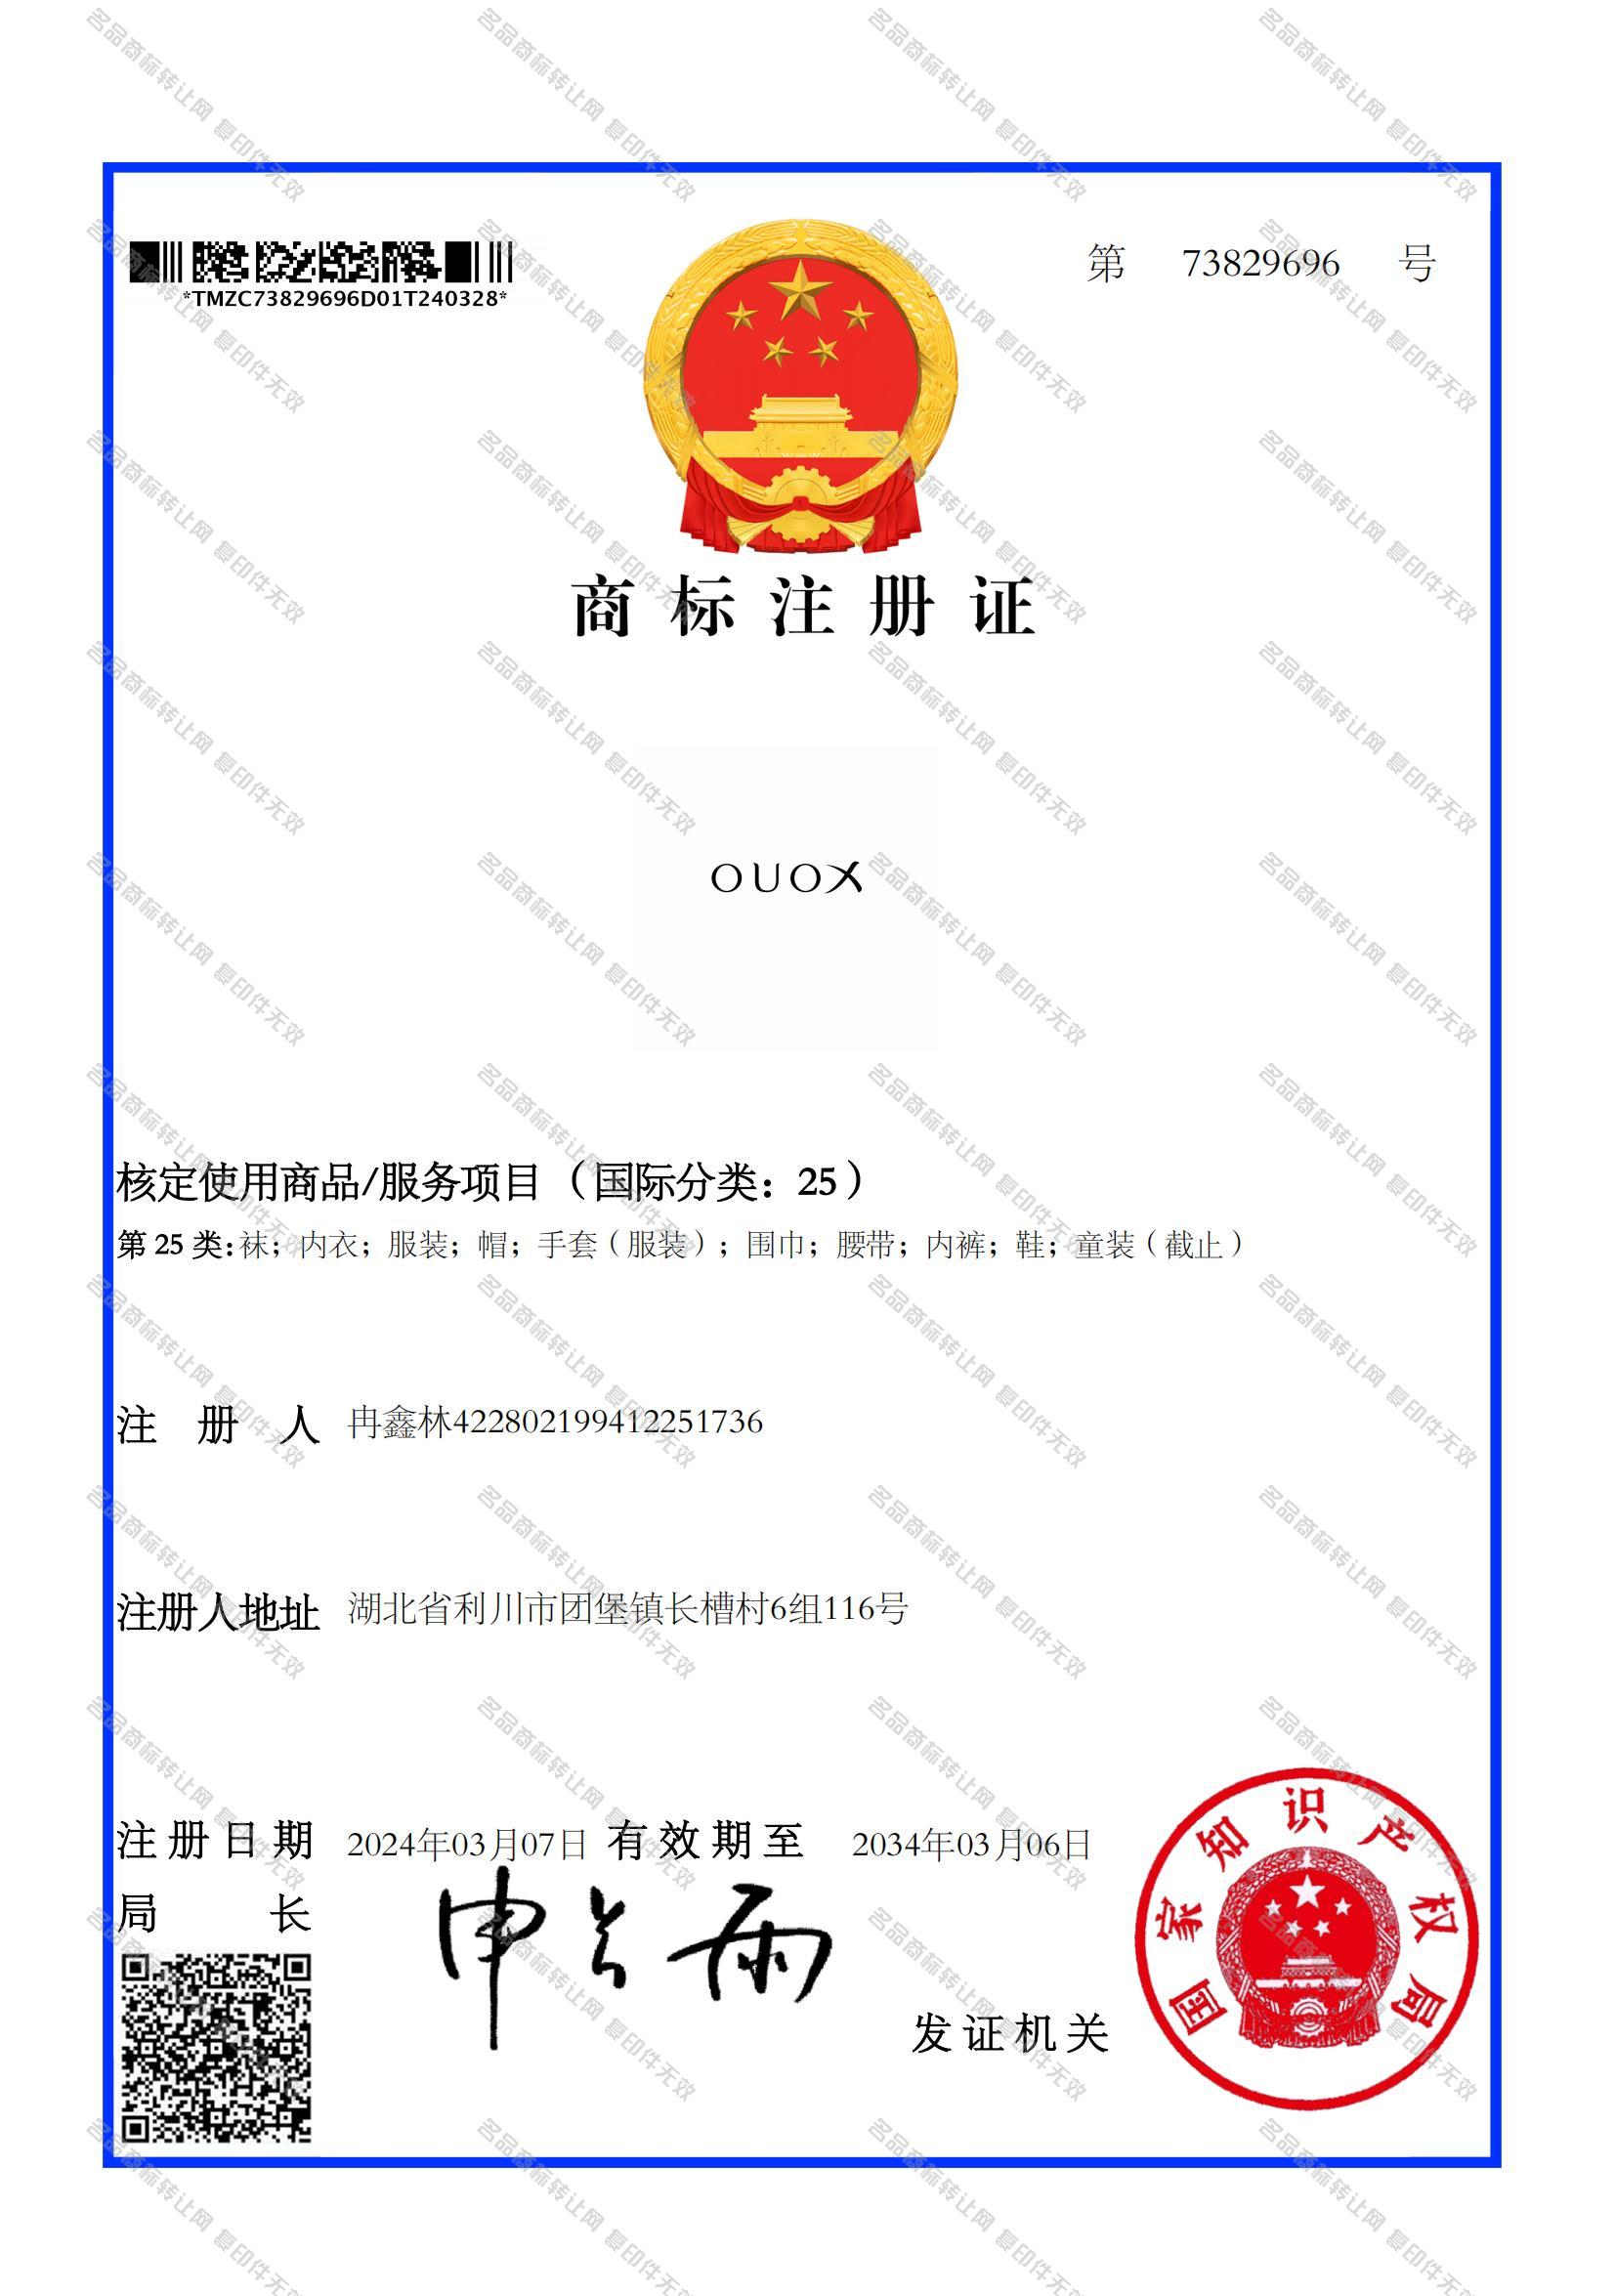 OUOX注册证